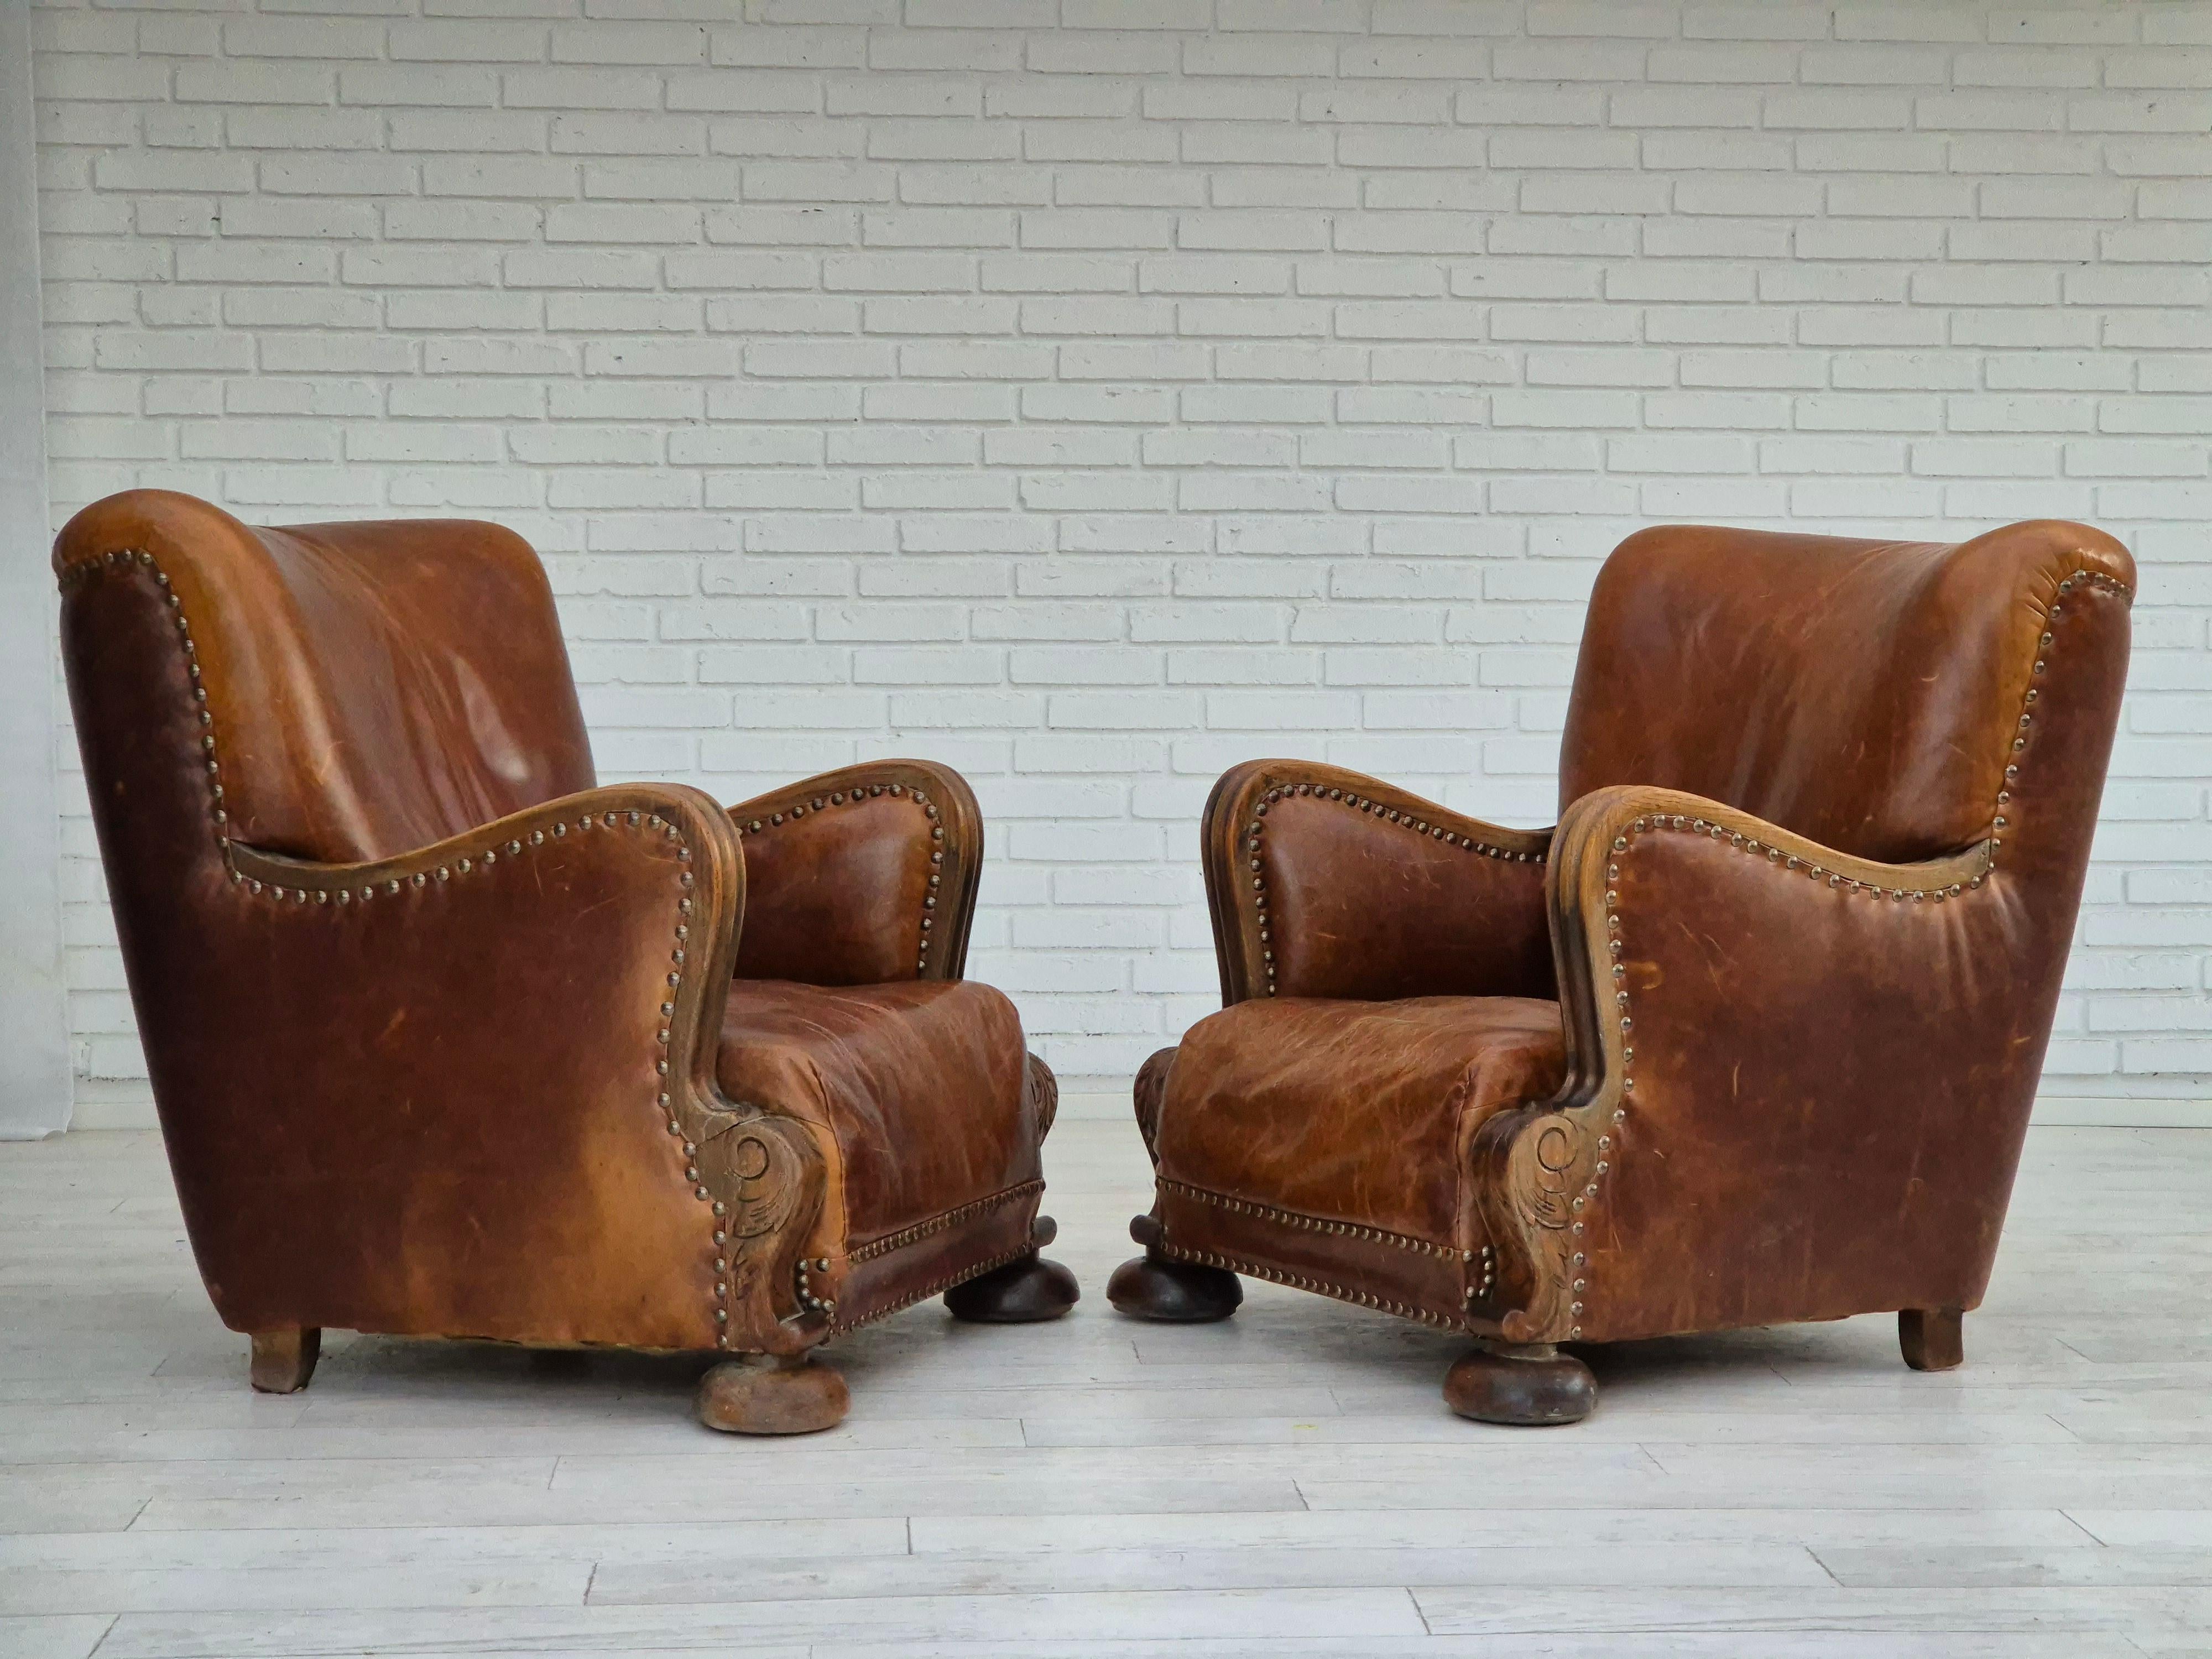 1950-60s, Danish relax armchair in good condition: no smells and no stains. Brown leather with patina, oak wood legs, and armrests. Brass springs in the seat. Manufactured by Danish furniture manufacturer in about 1950-60s.